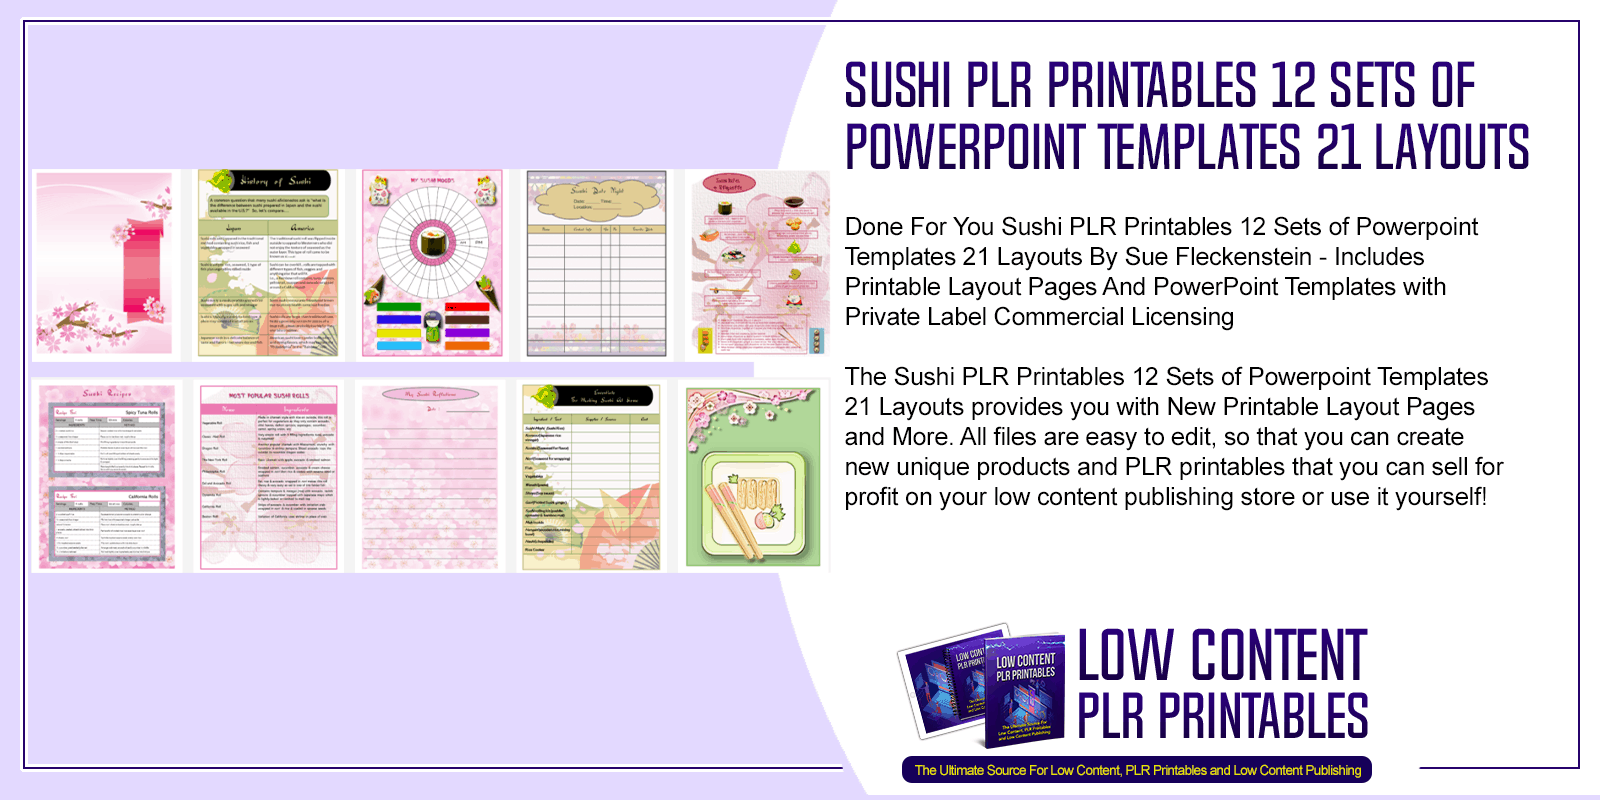 Sushi PLR Printables 12 Sets of Powerpoint Templates 21 Layouts